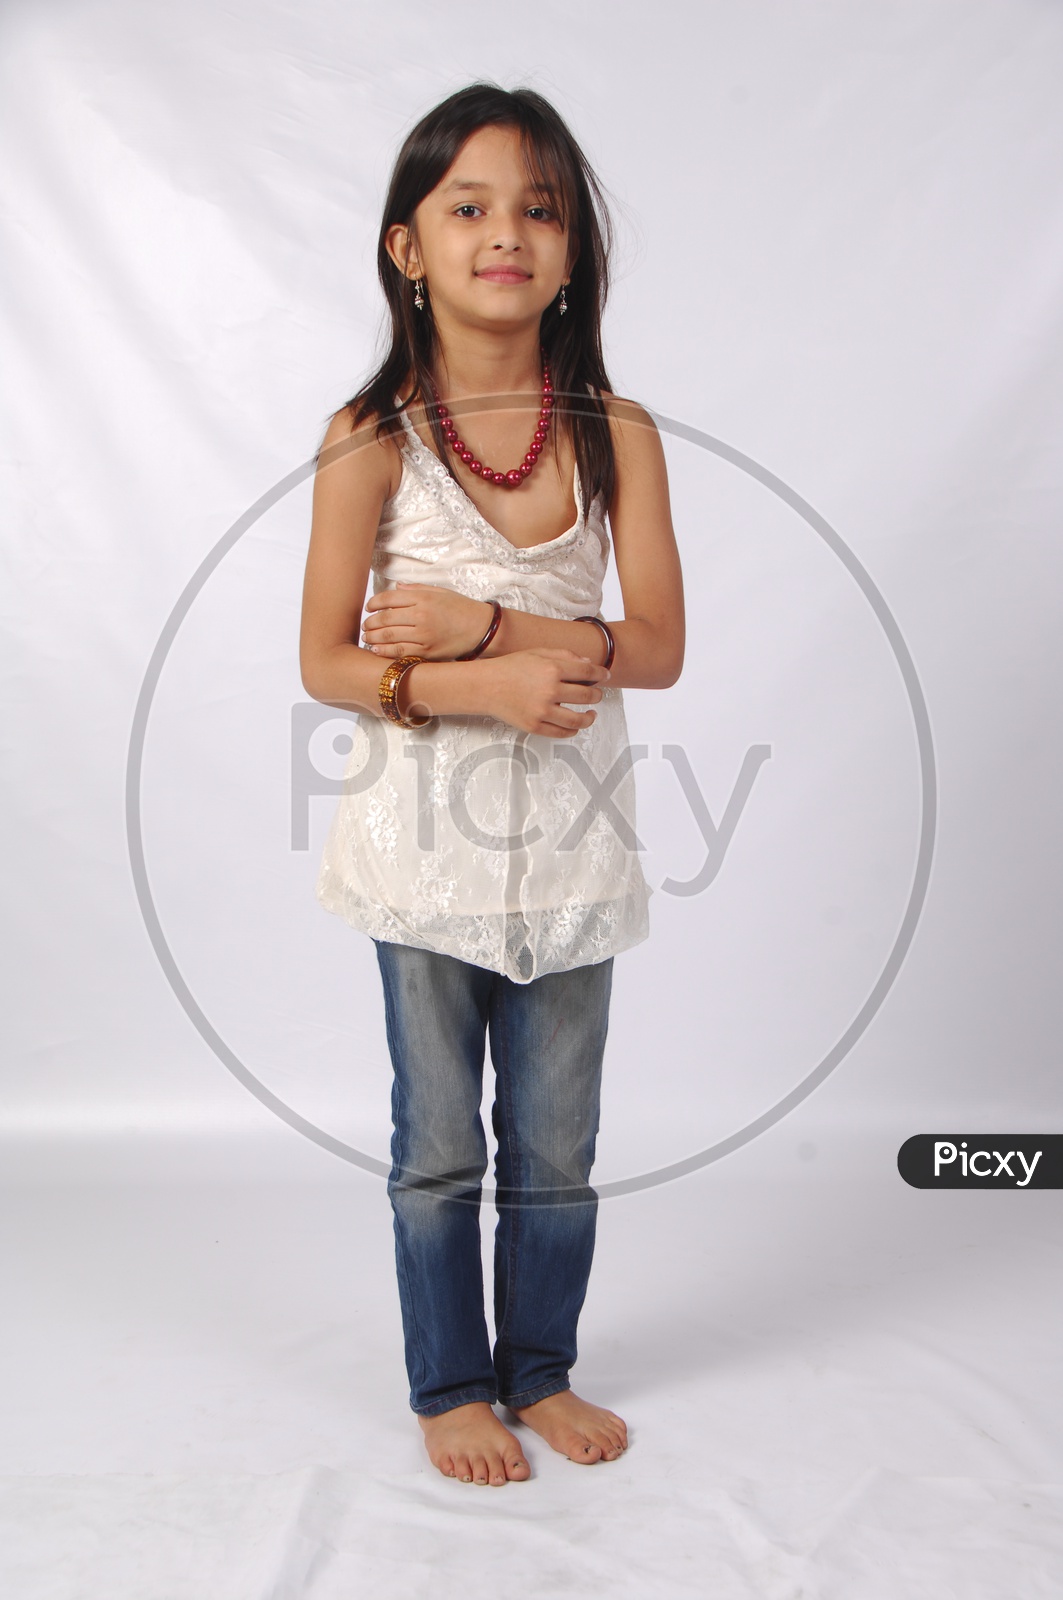 Portrait Of a Cute and Chubby indian Girl Child With Smile Face On an Isolated White Background